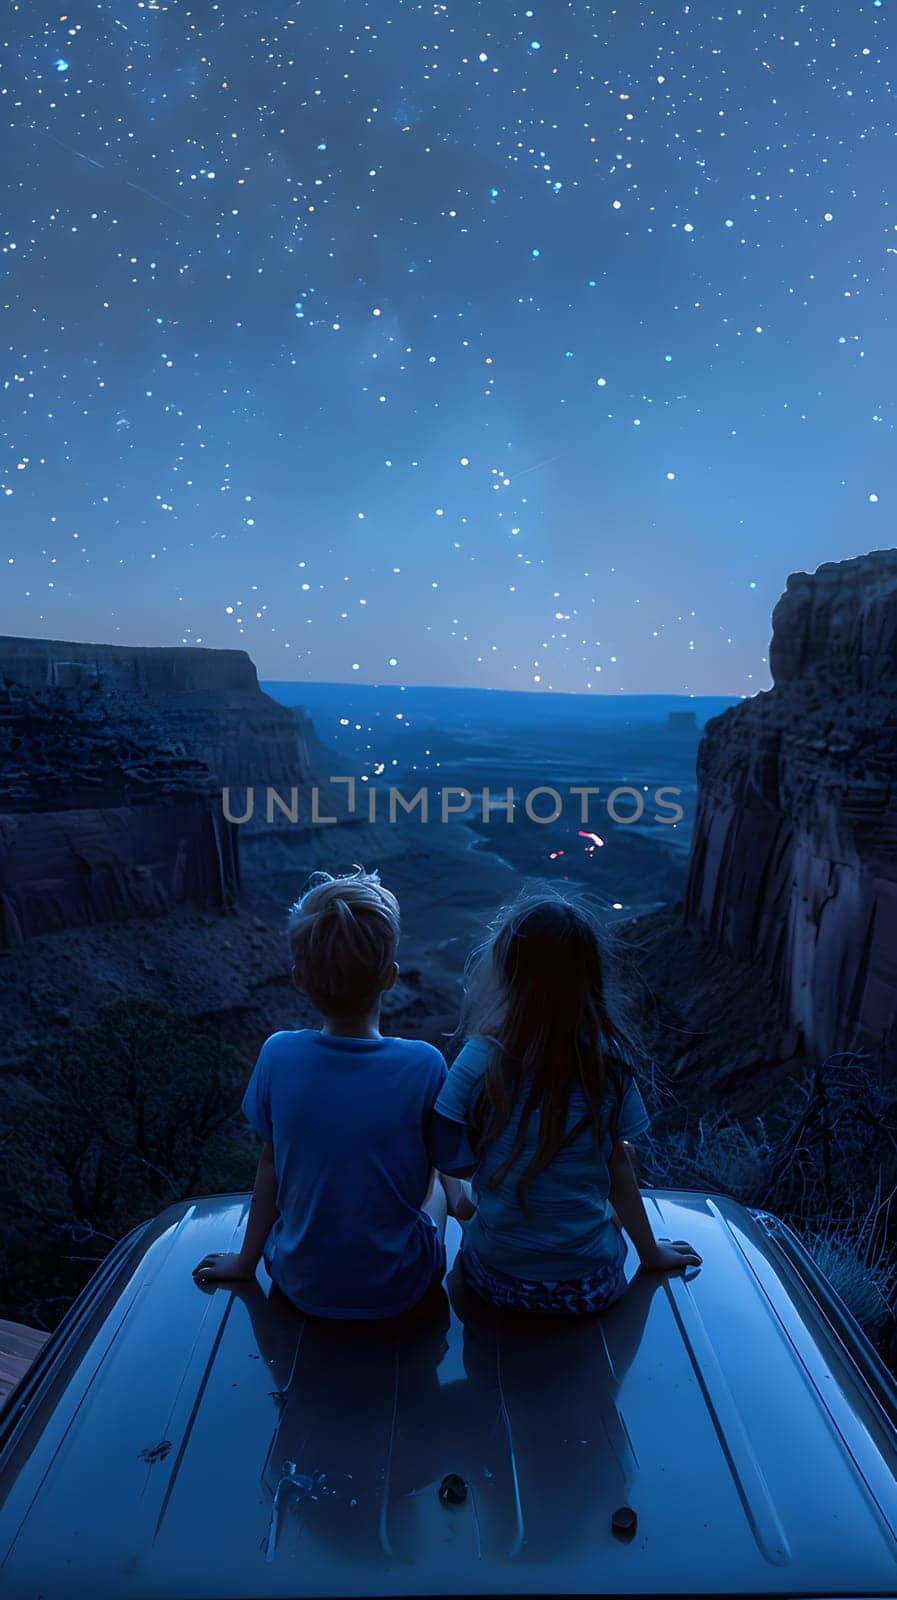 A boy and a girl are sitting on the hood of a car, gazing at the electric blue sky dotted with stars. The landscape around them is peaceful, making their travel experience fun and memorable